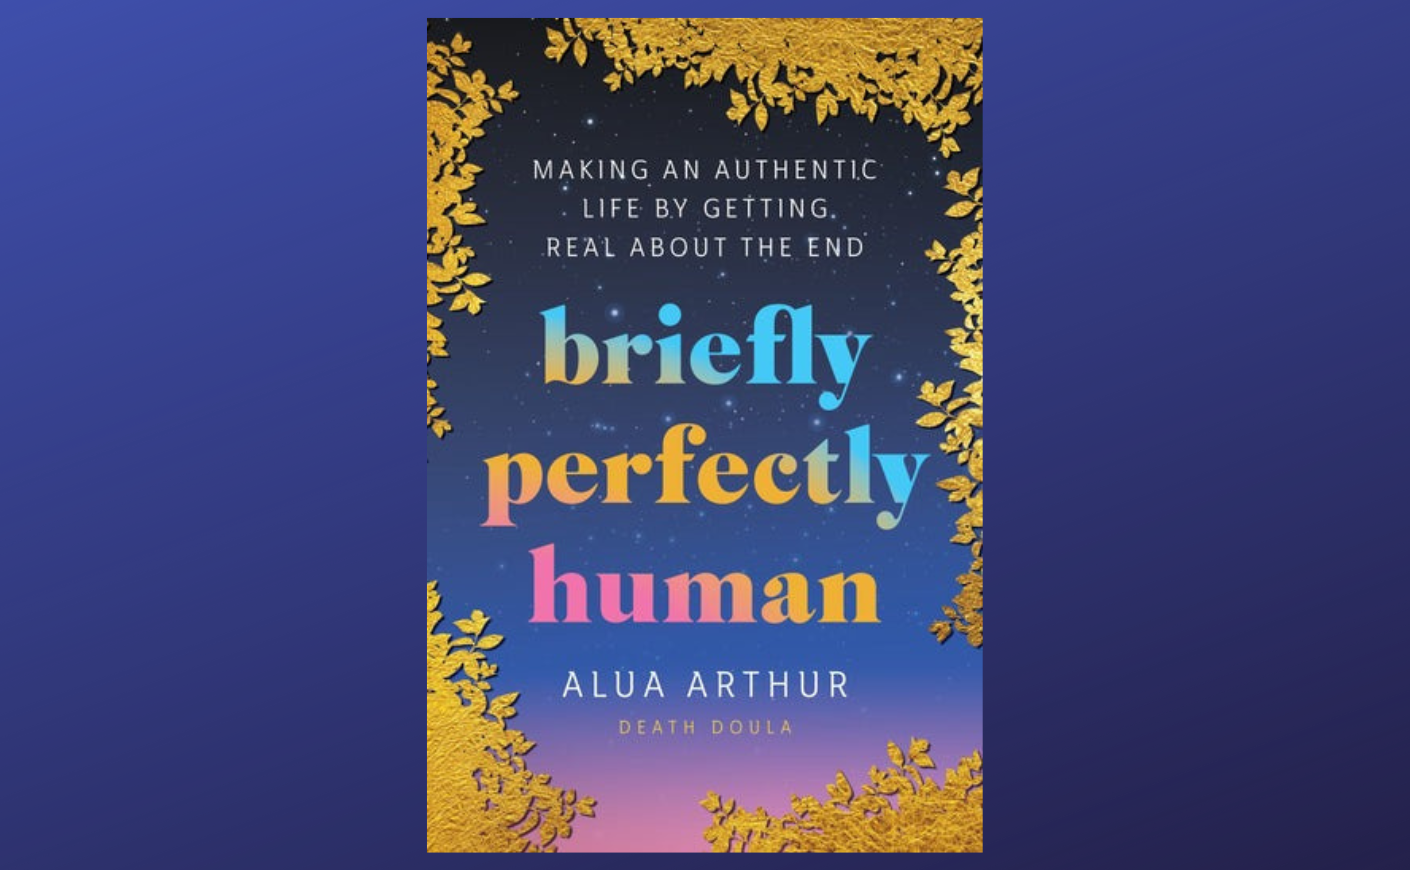 Book cover for "Briefly Perfectly Human" by Alua Arthur